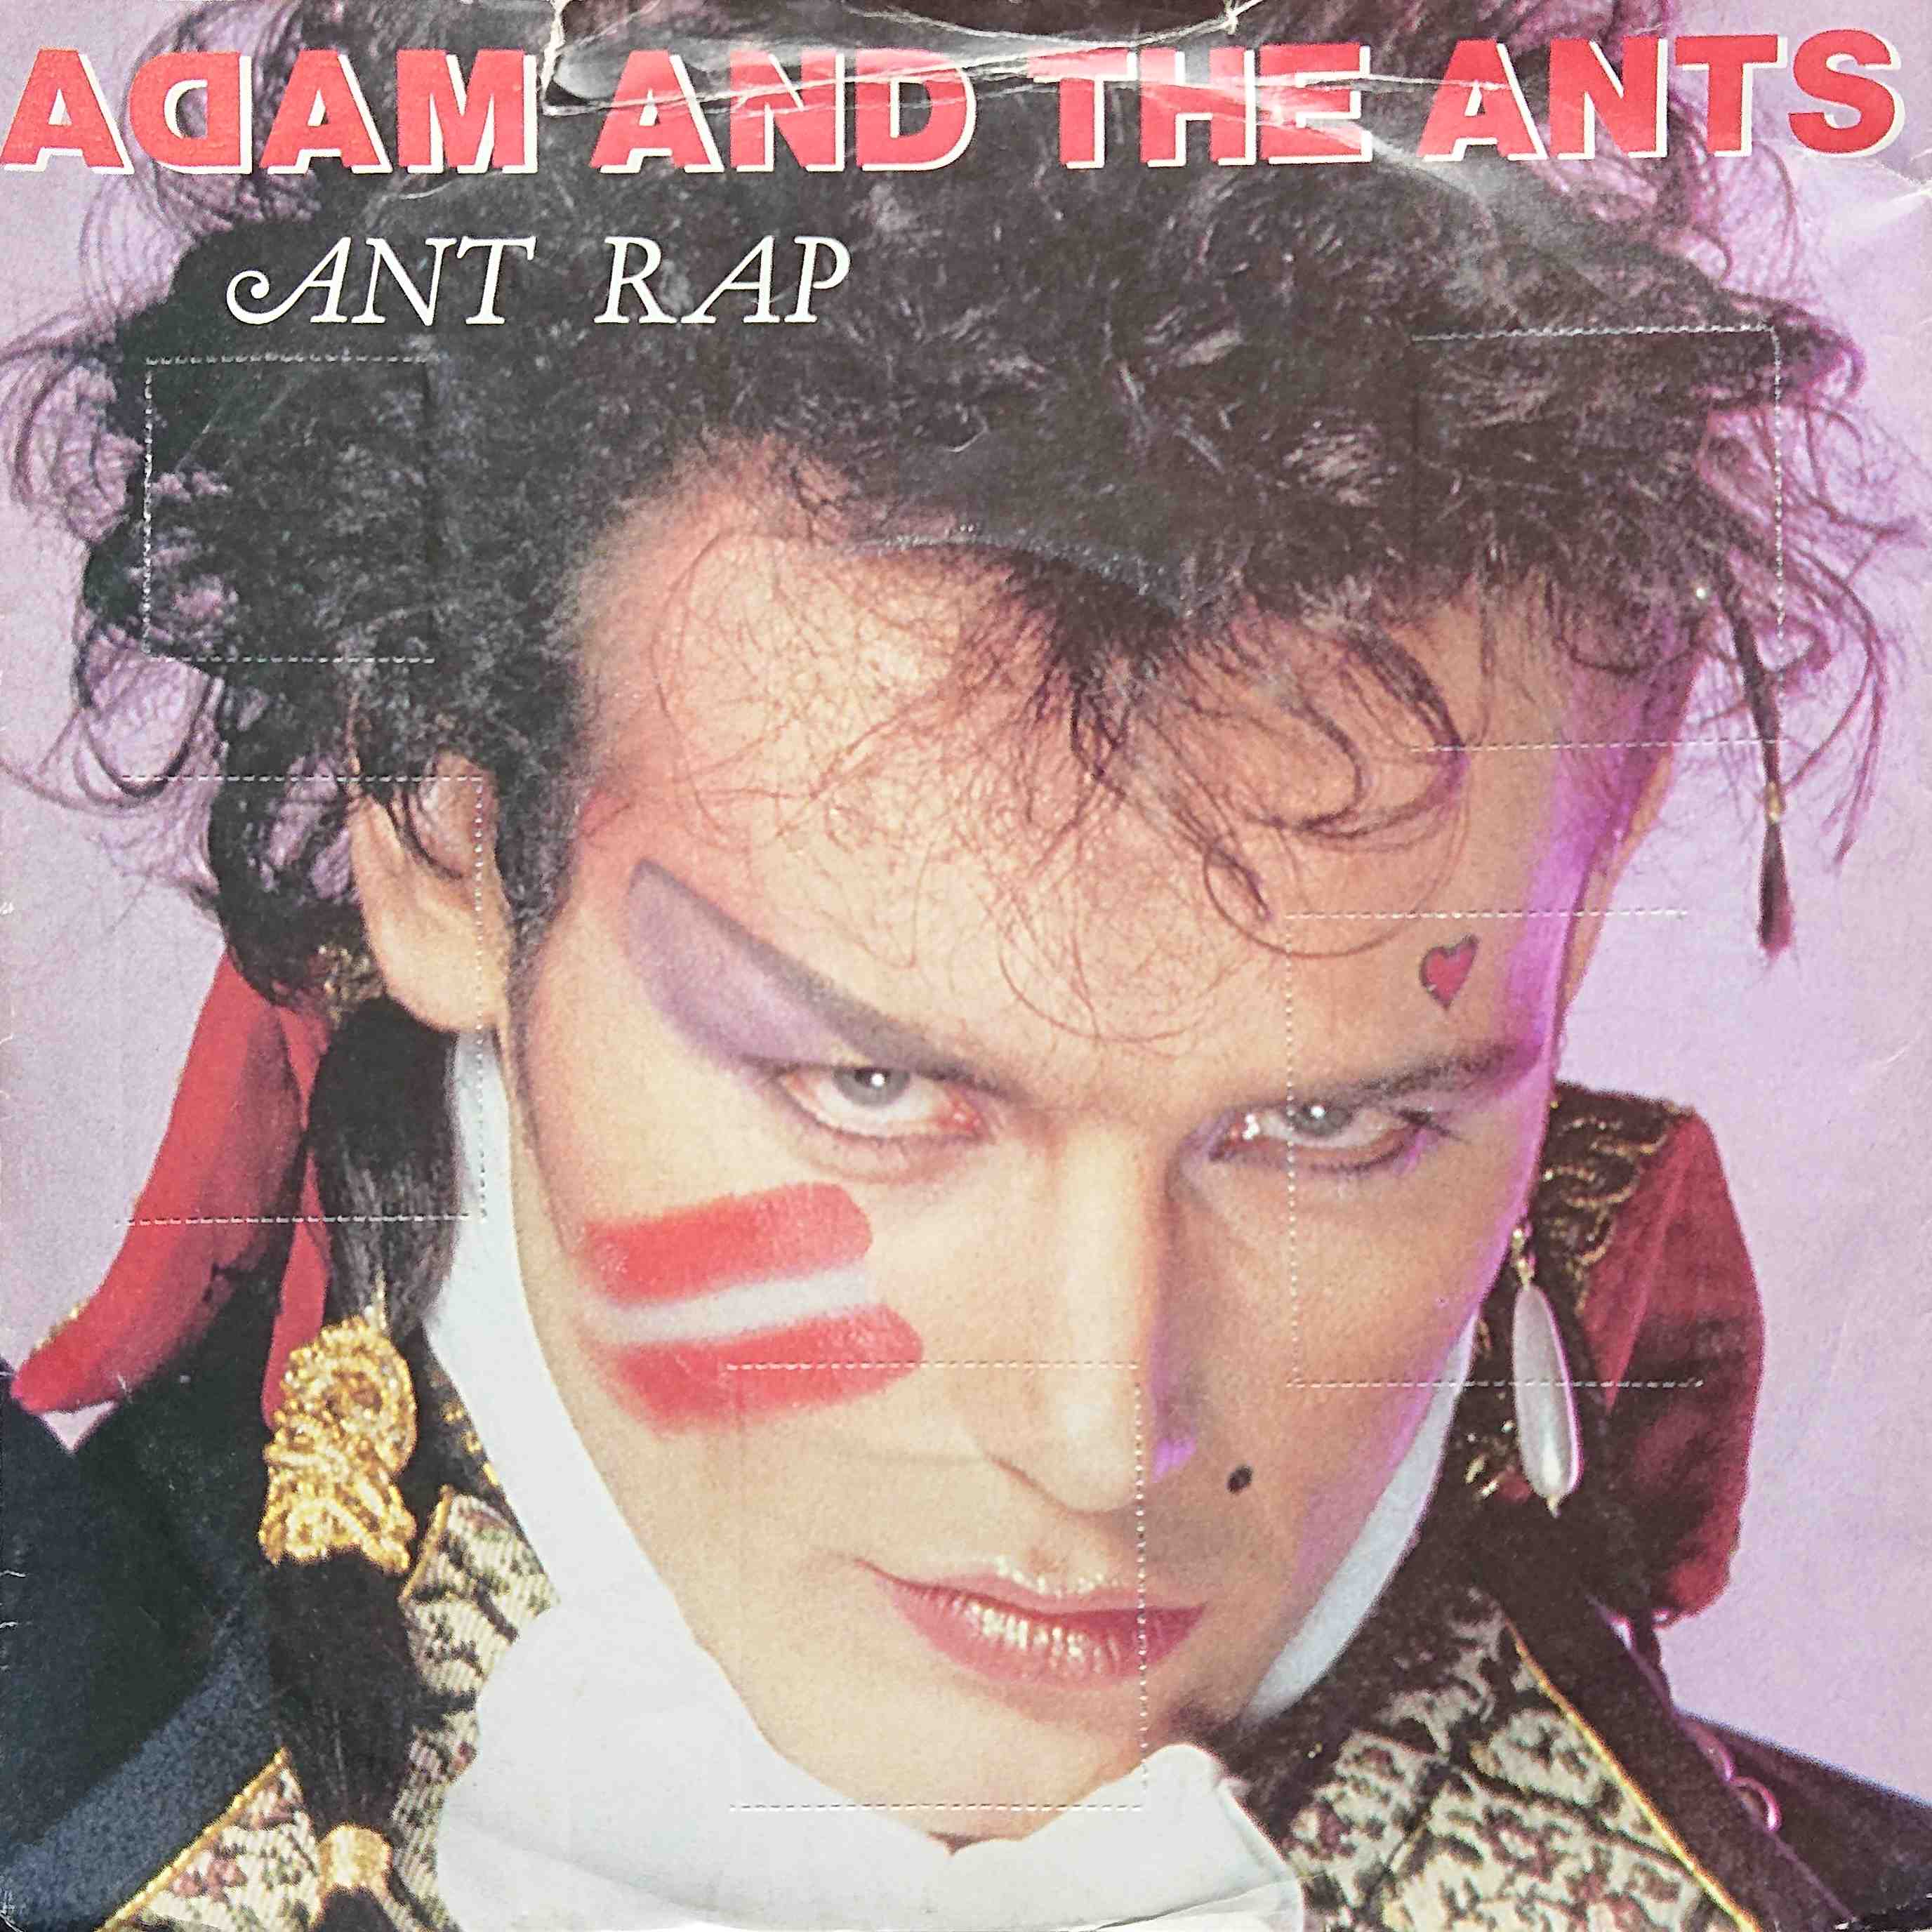 Picture of Ant rap by artist Adam and the Ants 